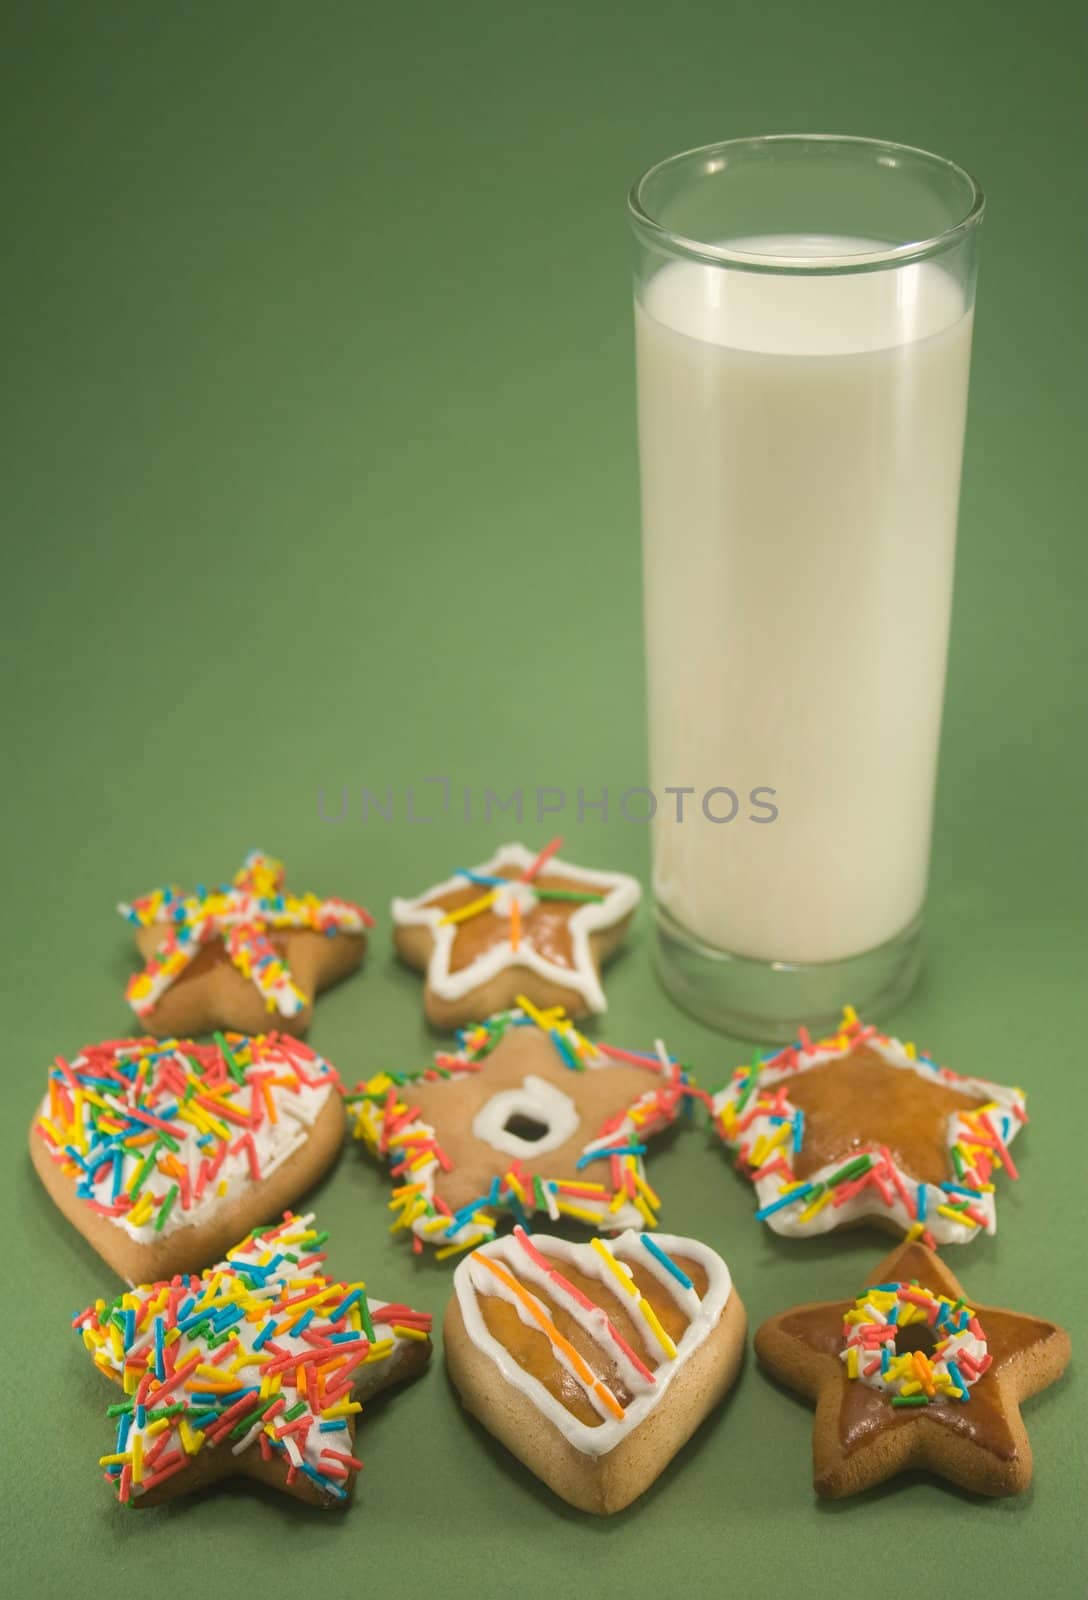 Cookies and milk by timscottrom